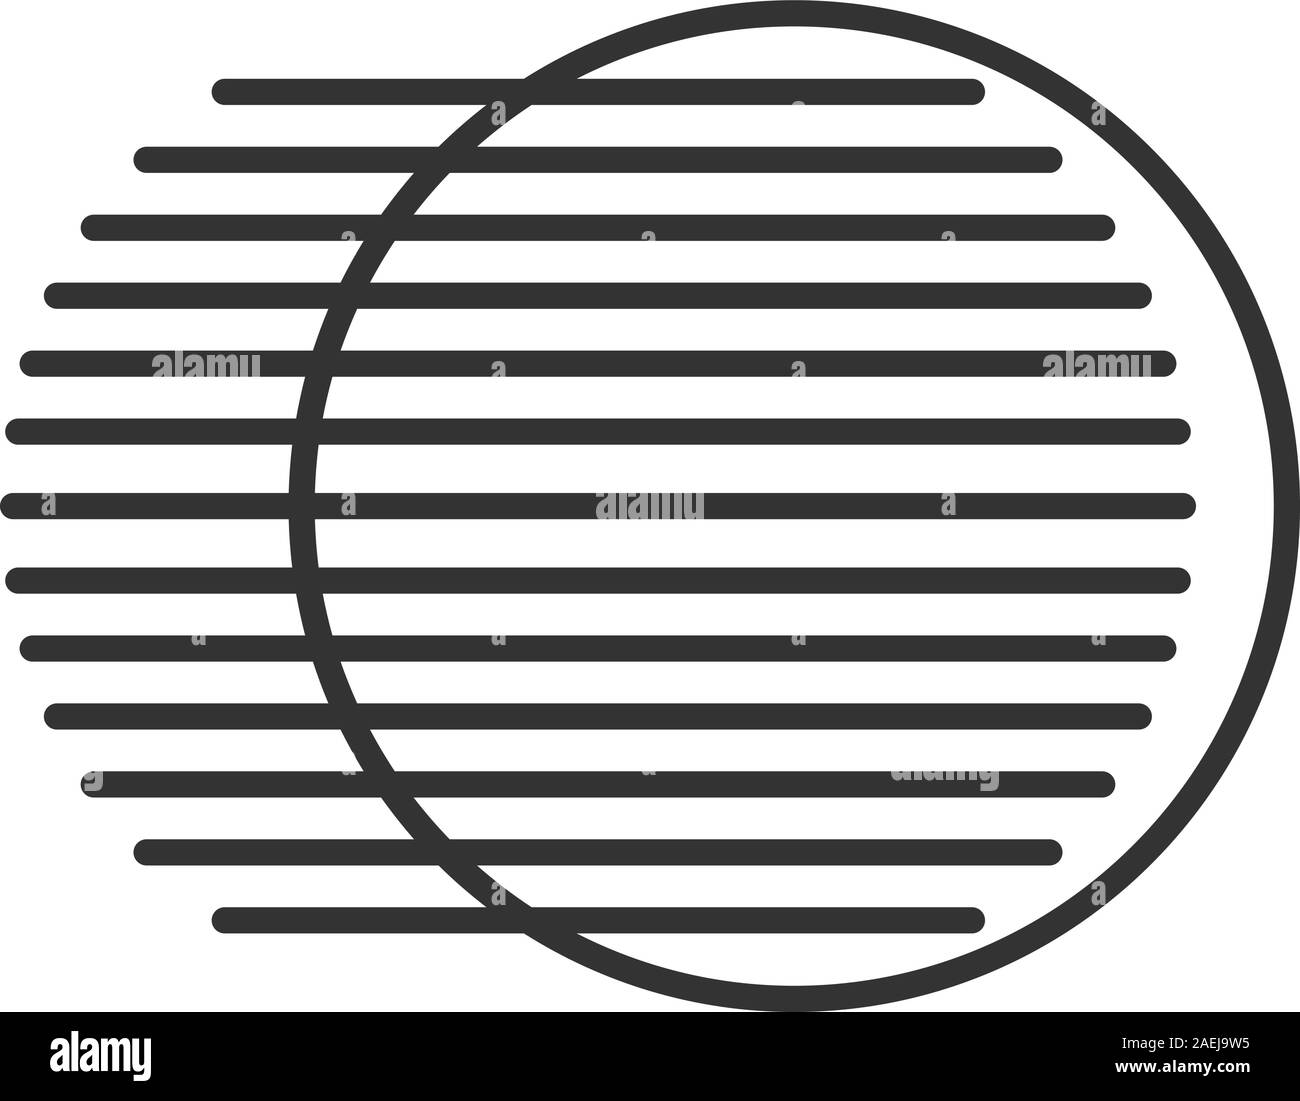 https://c8.alamy.com/comp/2AEJ9W5/movement-symbol-linear-icon-thin-line-illustration-dynamic-motion-concept-contour-symbol-vector-isolated-outline-drawing-2AEJ9W5.jpg